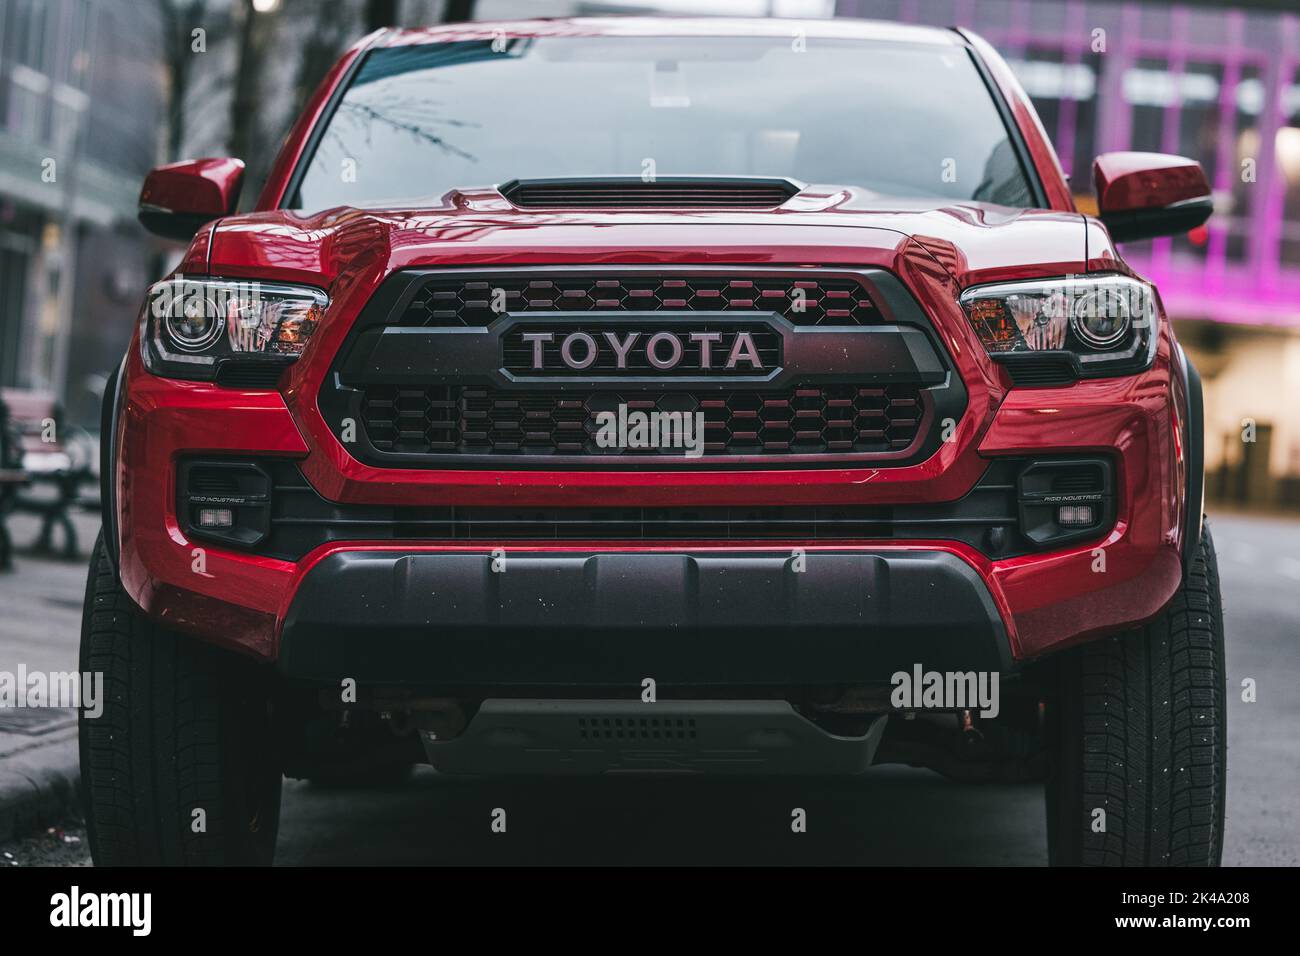 A red Toyota Tacoma parked downtown Calgary, Alberta. Stock Photo